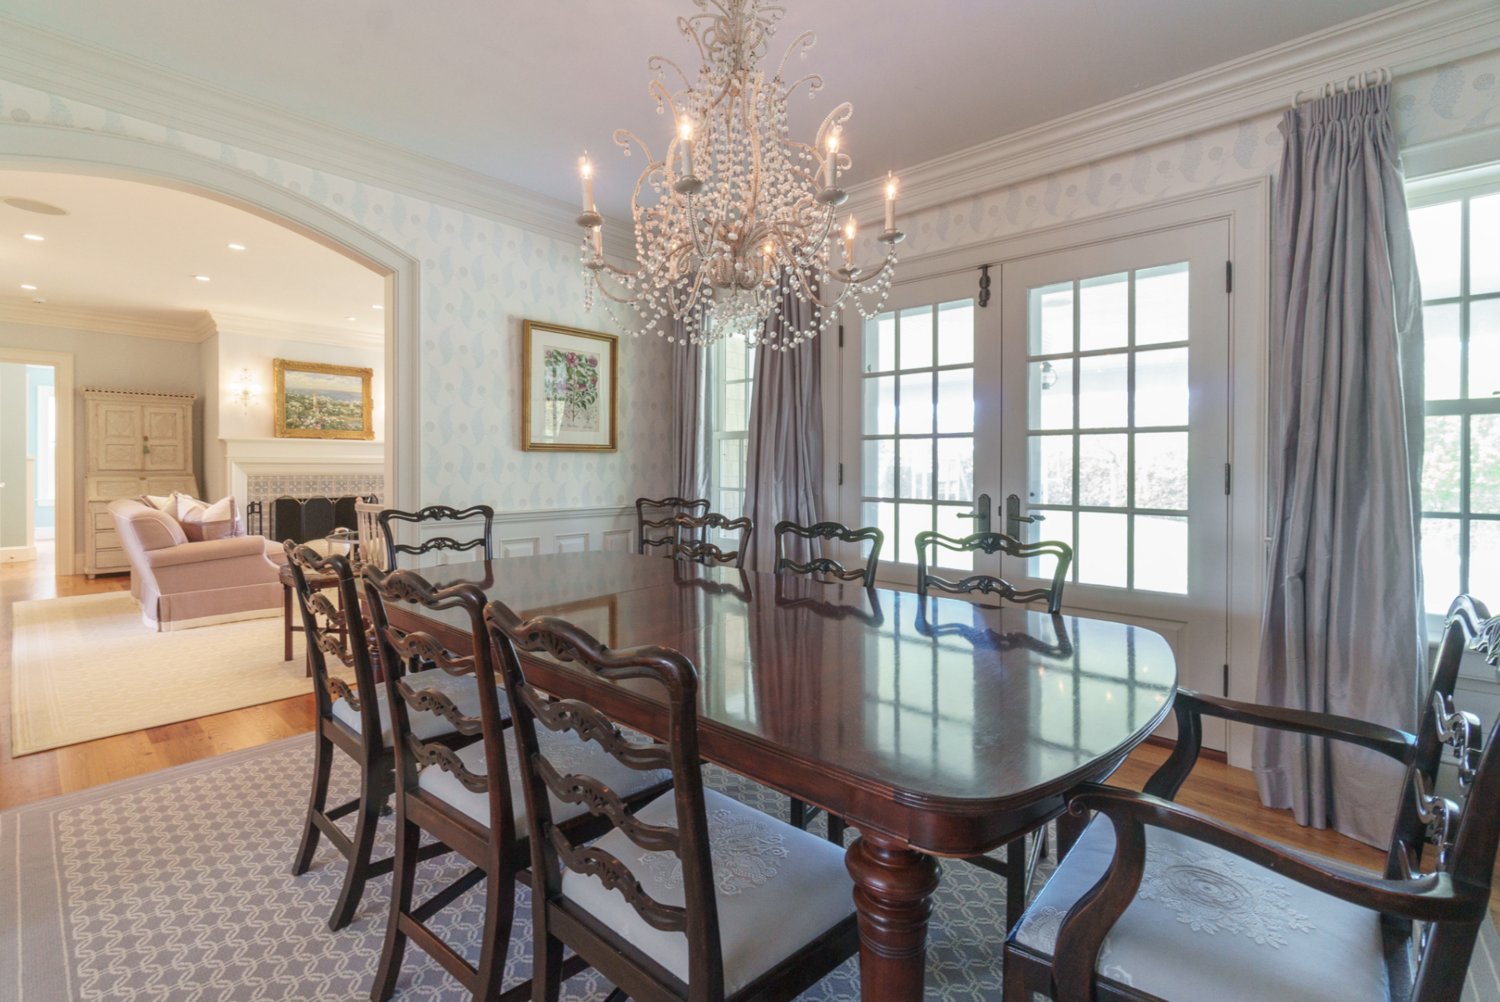 The formal dining room has seating for at least eight, French-door access to the covered deck, and pocket doors for additional privacy.